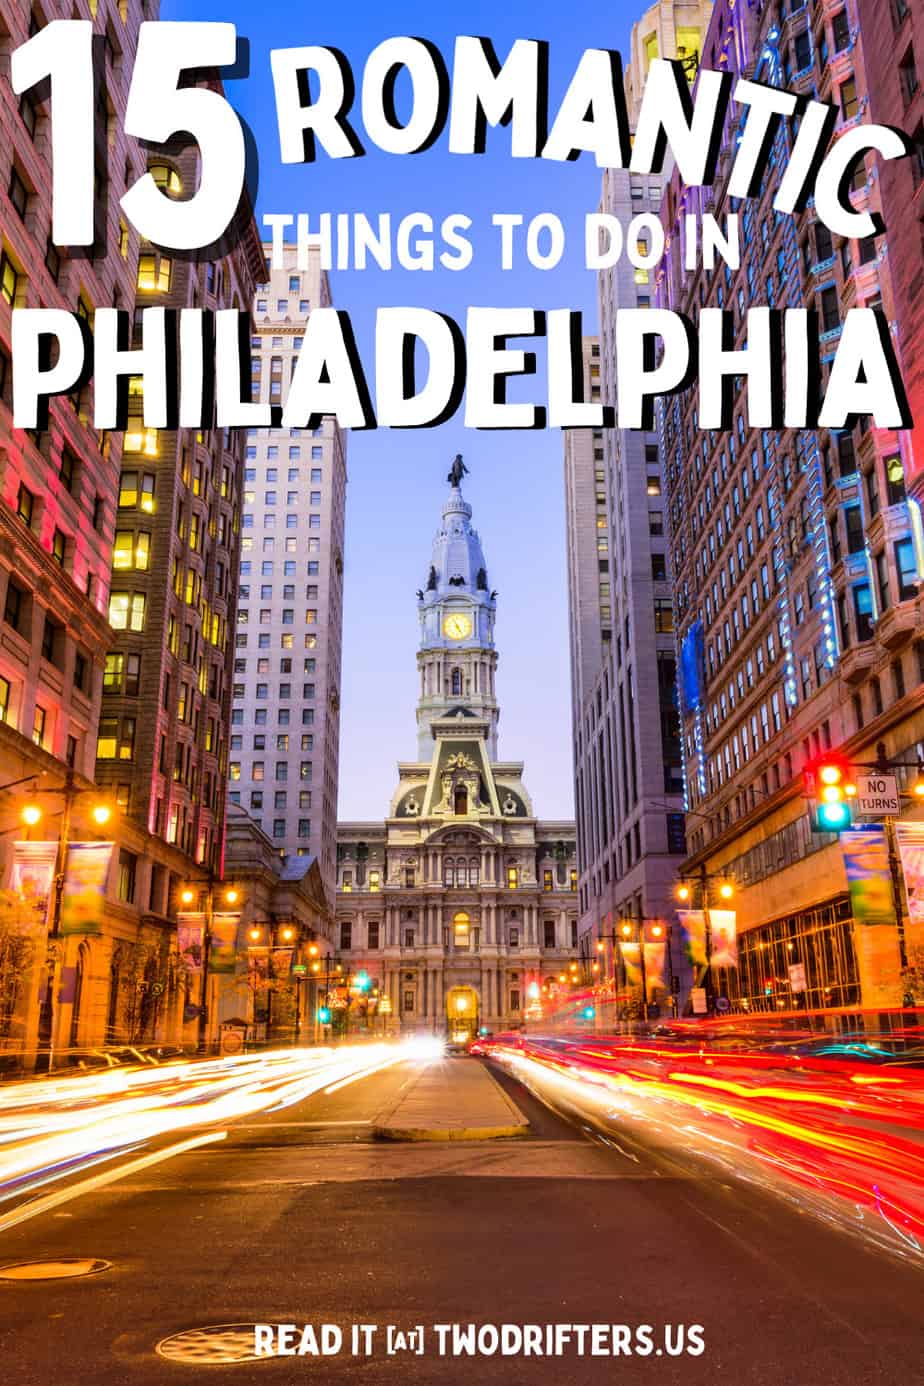 Pinterest social share image that says "15 Romantic Things to do in Philadelphia."